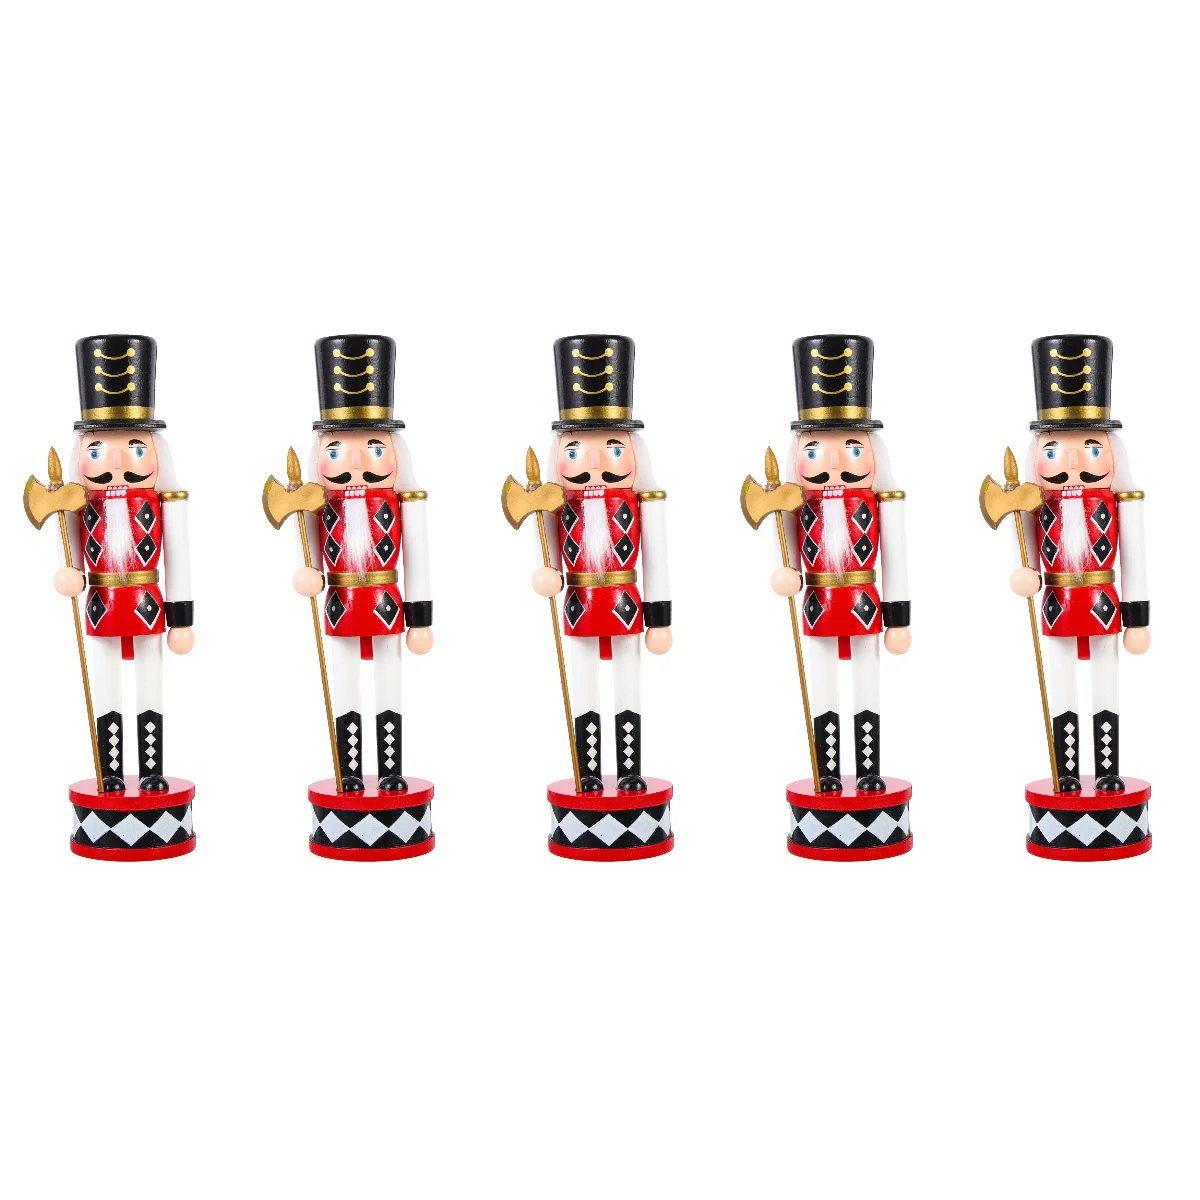 Enlarge 5x Nutcracker Ornament Traditional Nutcracker Christmas Indoor Ornament Festival Nutcracker for Families  Friends